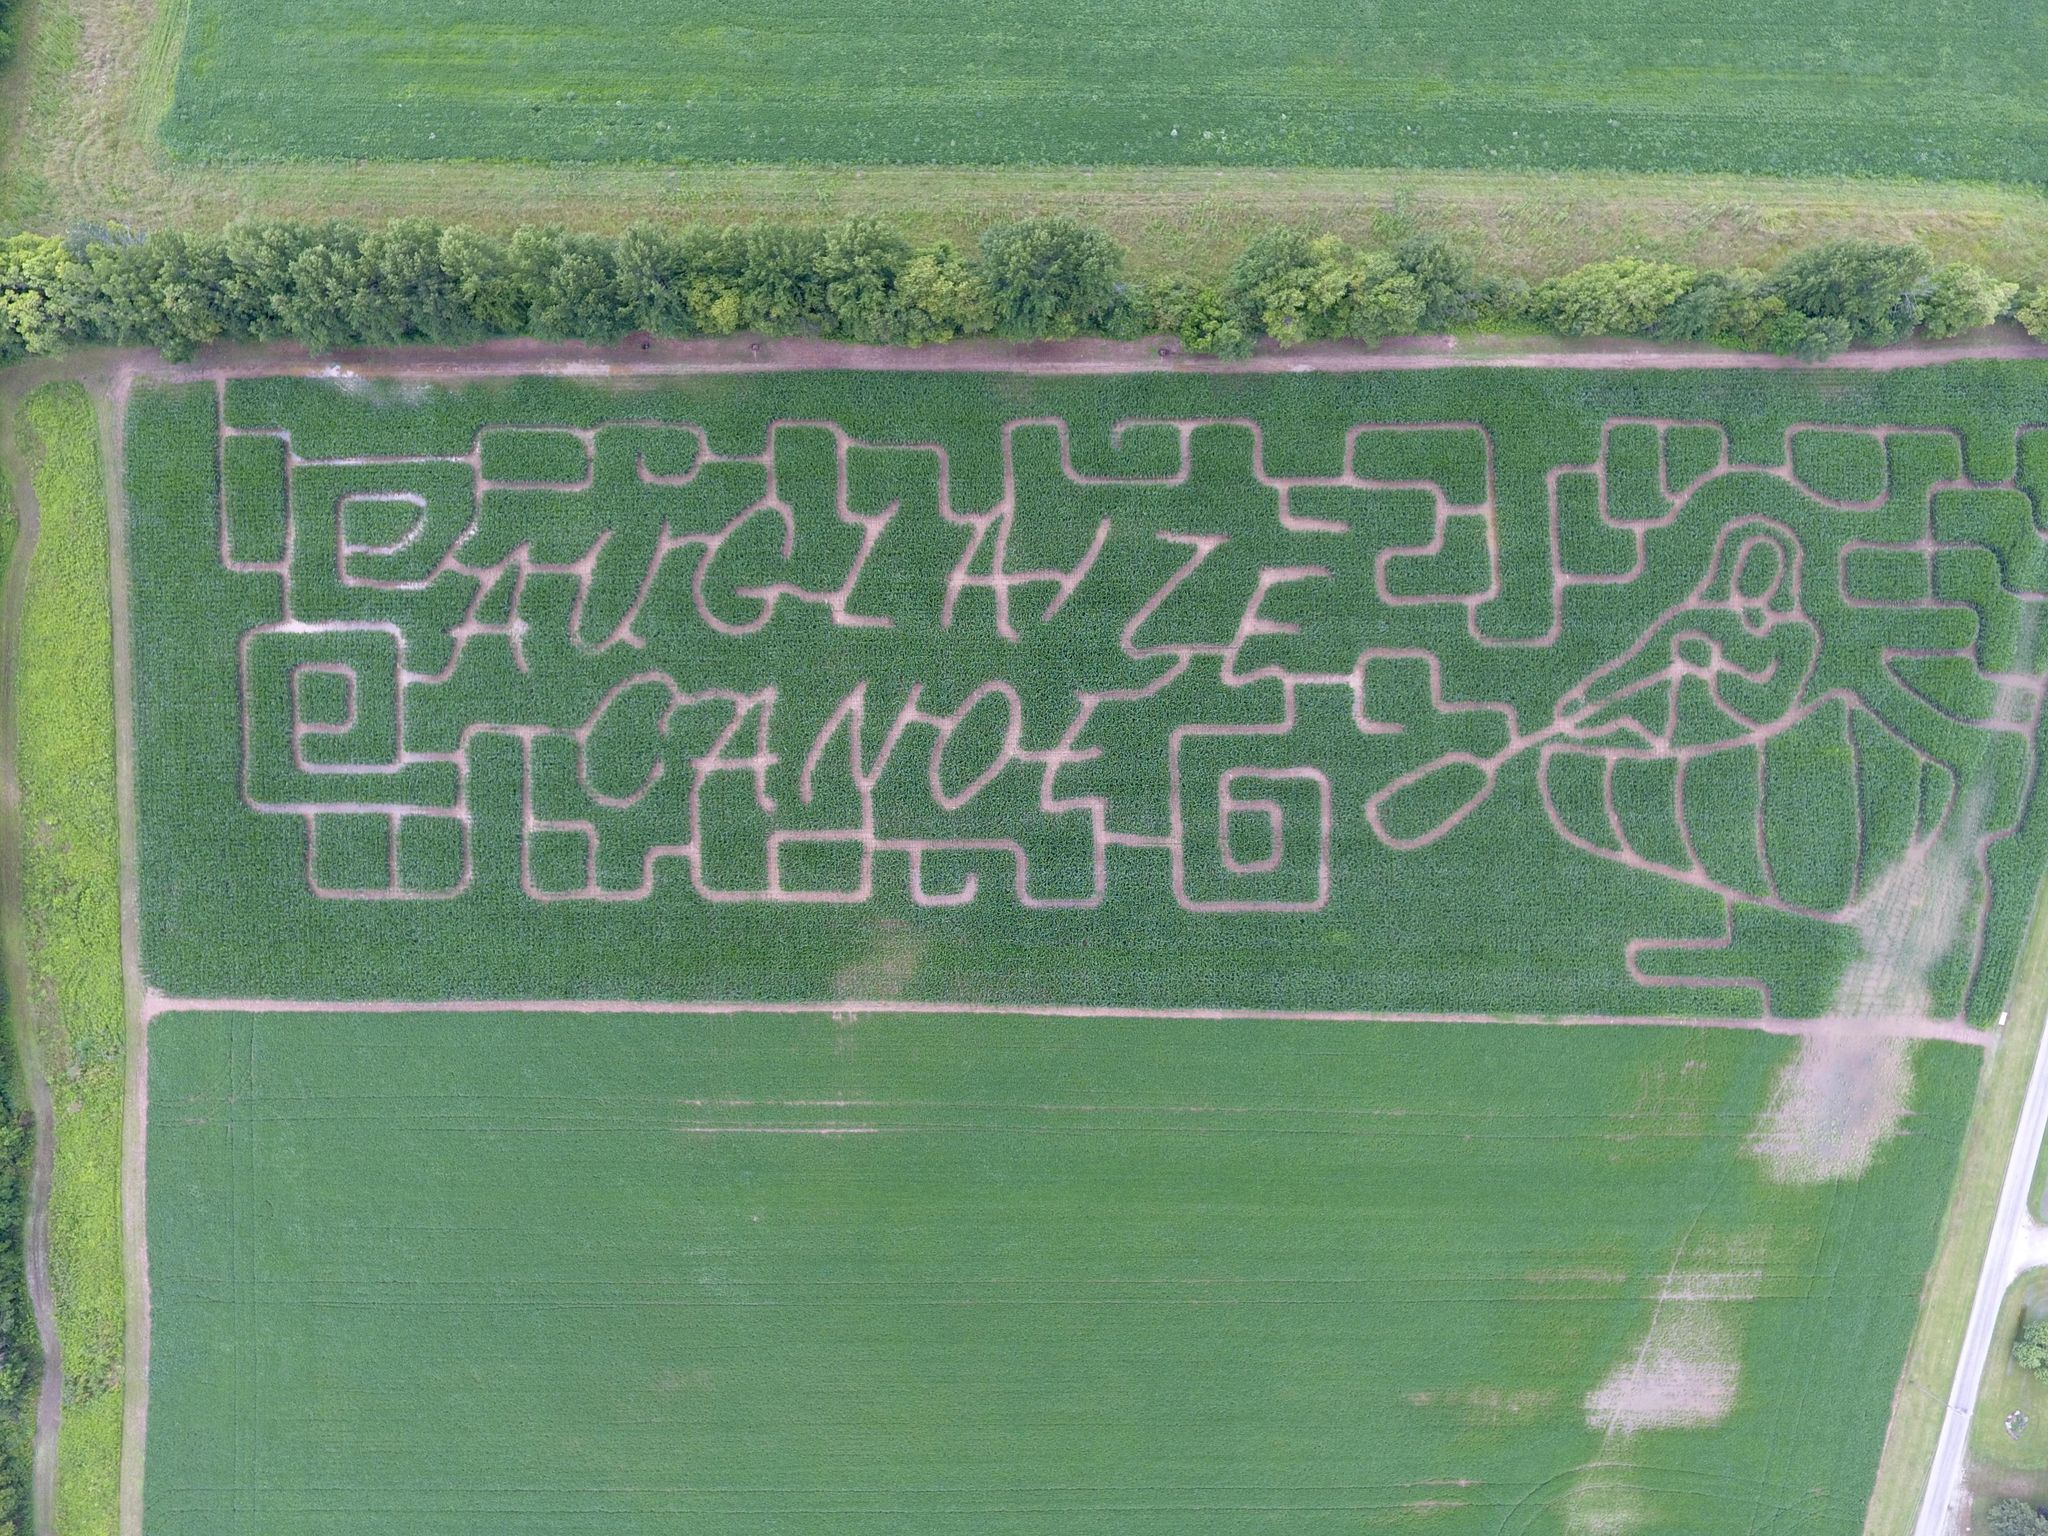 Take a look at the corn maze from 2021 from an areal perspective!